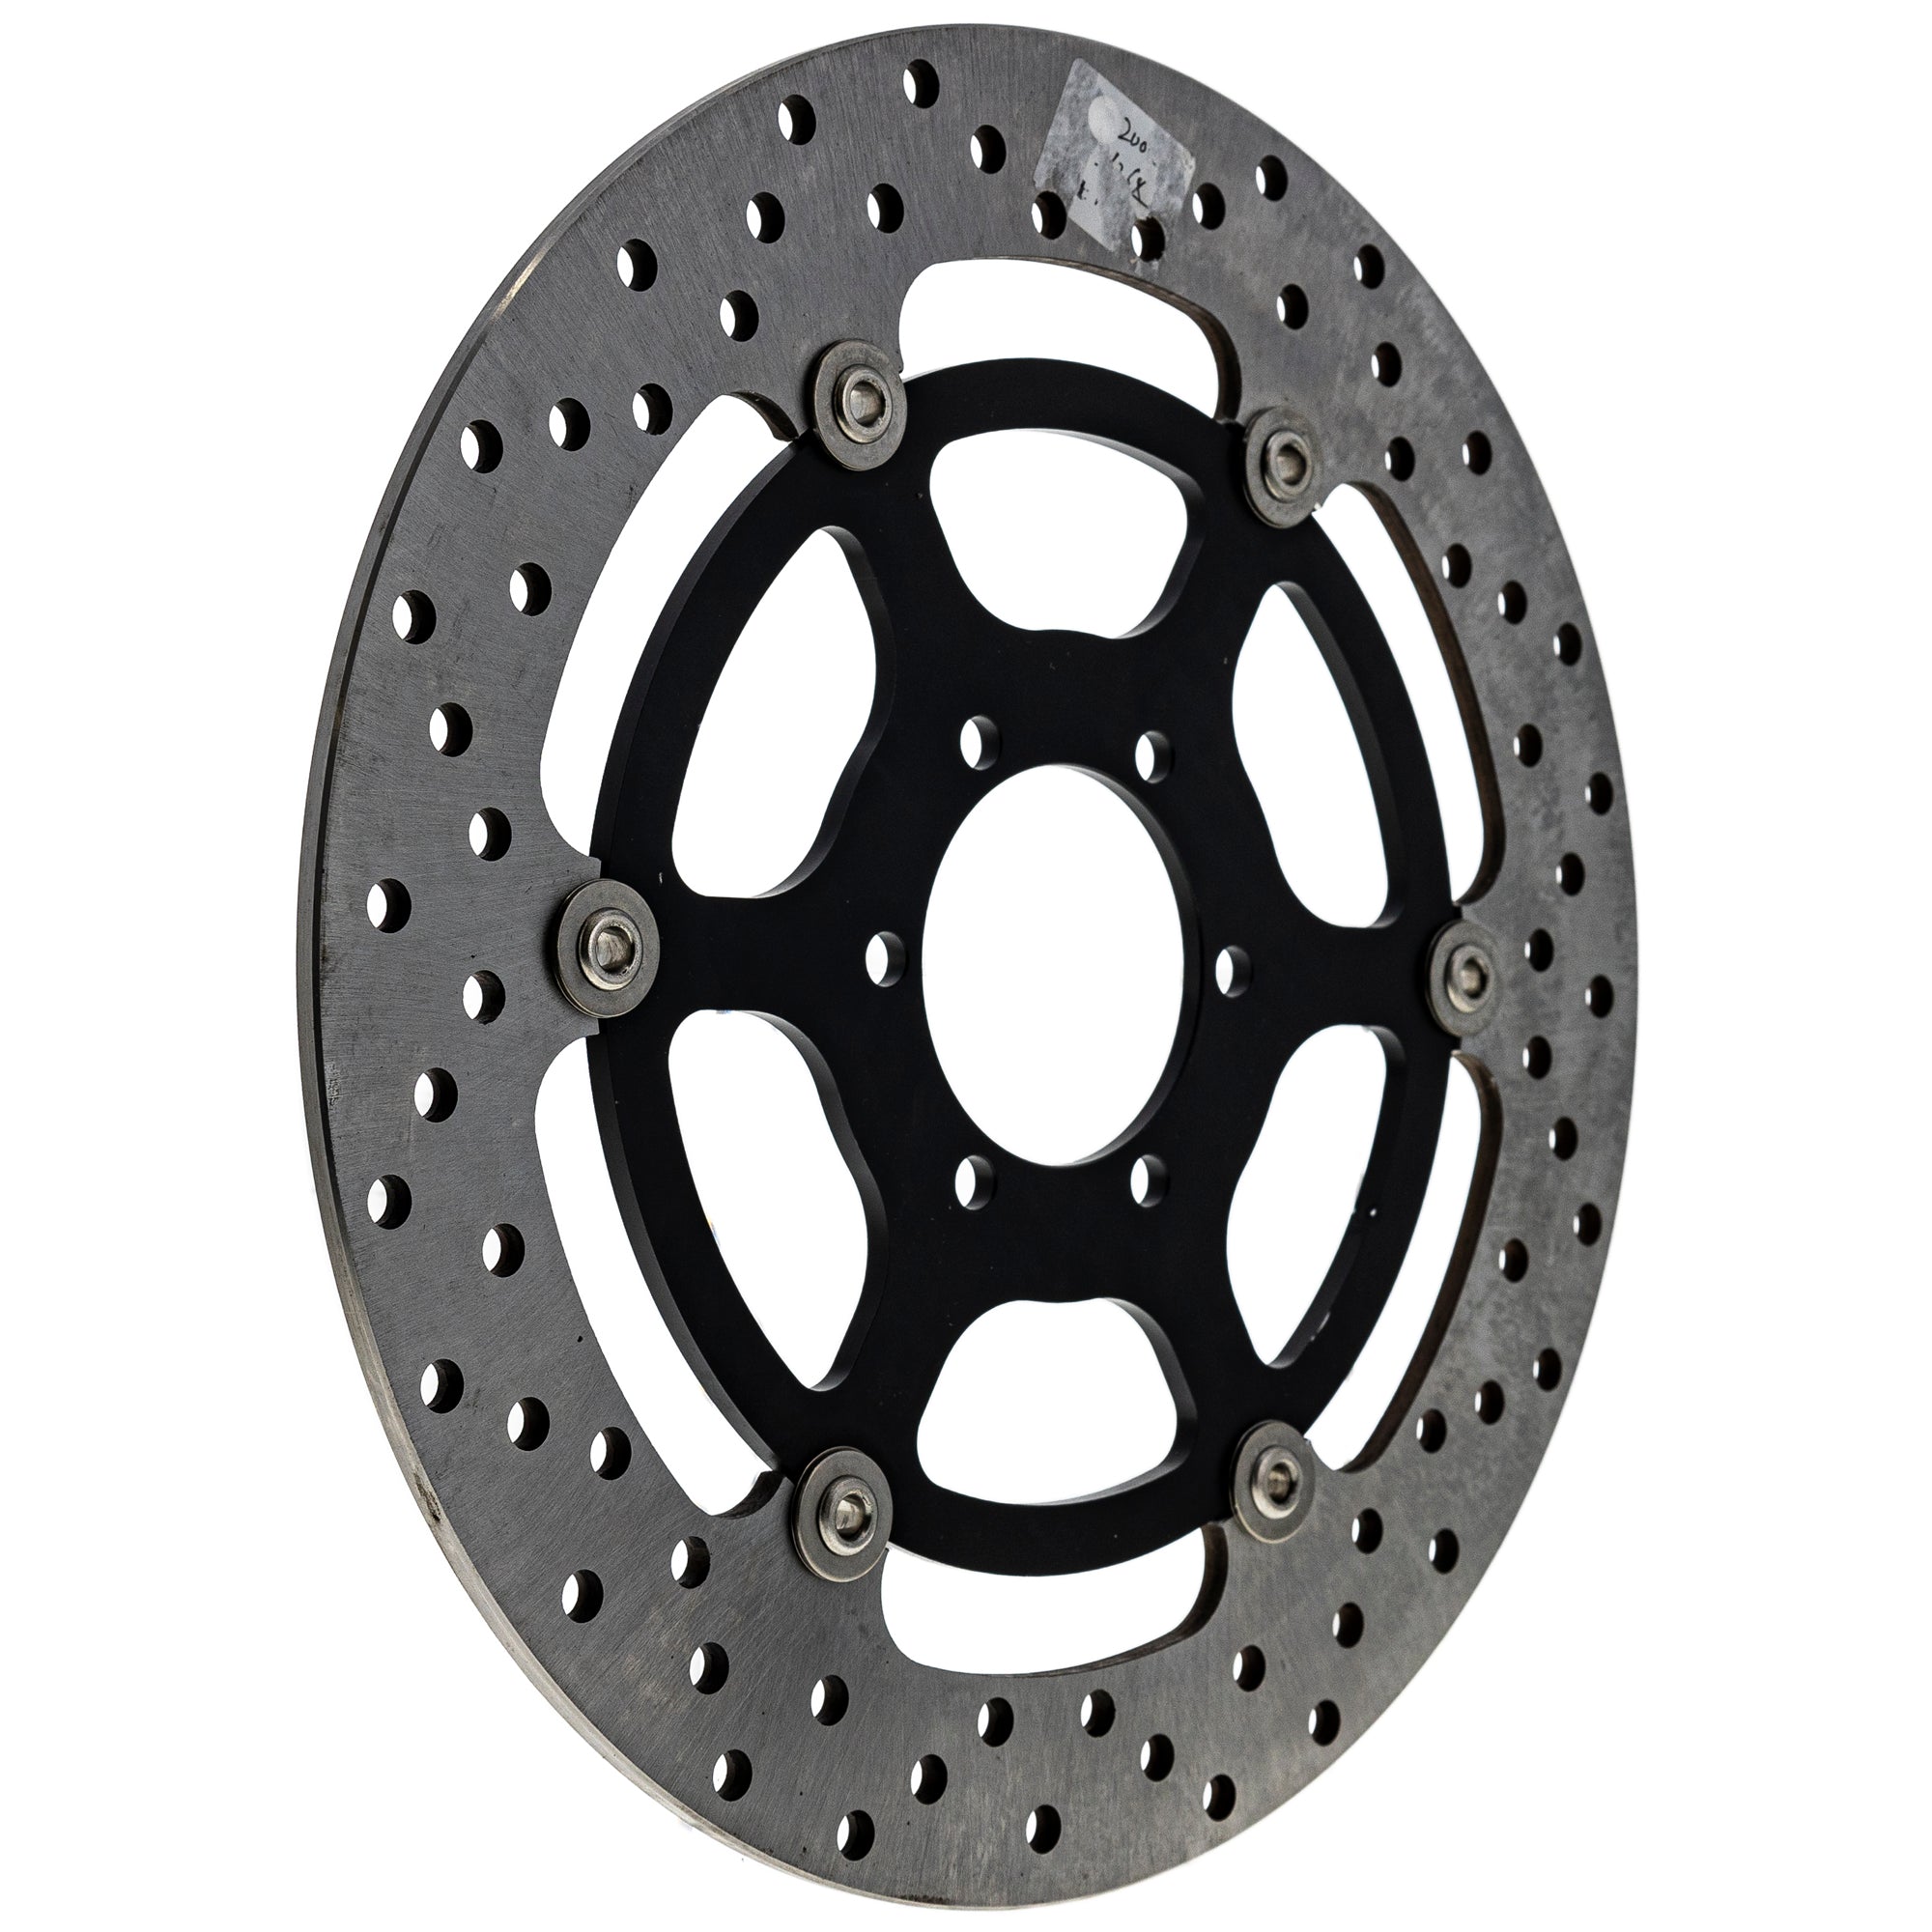 Front Brake Rotor 519-CRT2412R For Ducati 49240881A 49240821A 492.4.088.1A 492.4.082.1A